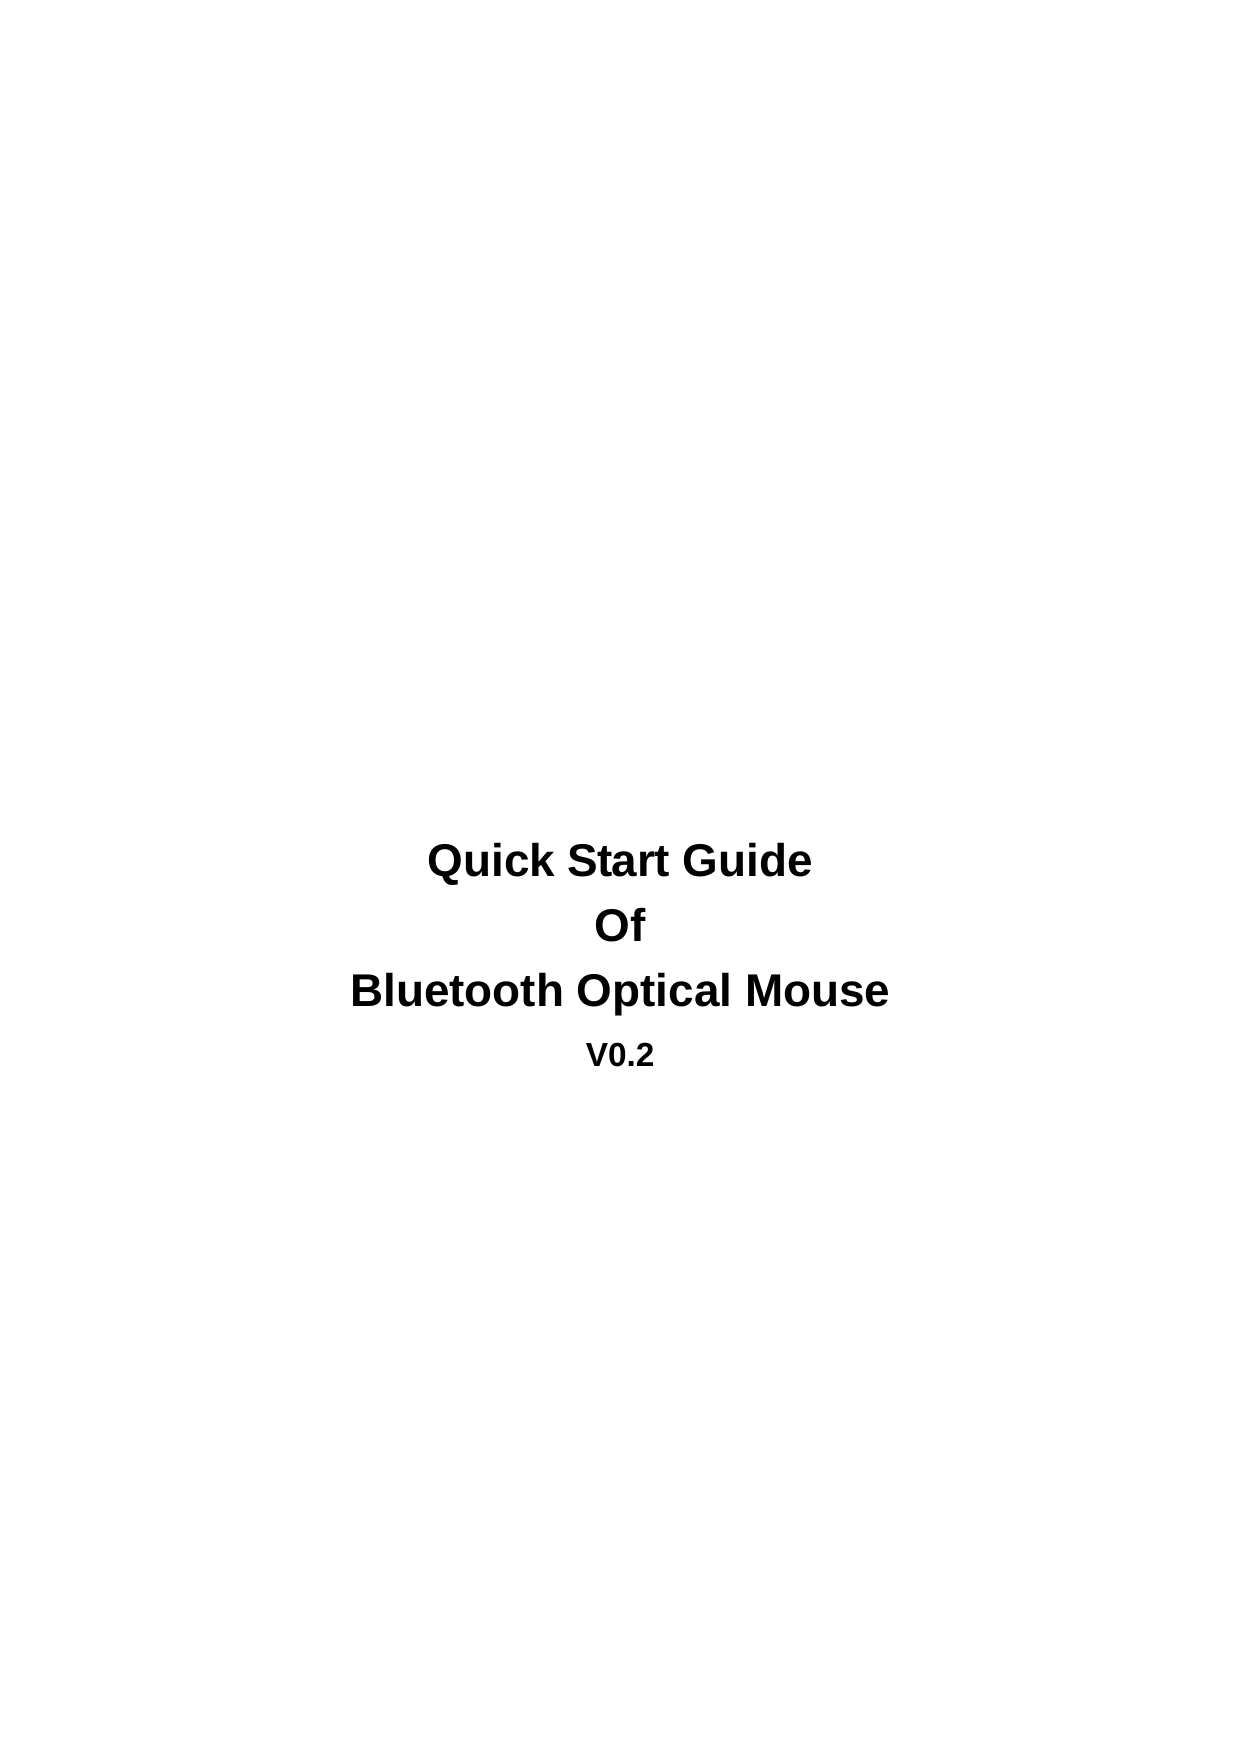           Quick Start Guide Of Bluetooth Optical Mouse V0.2         